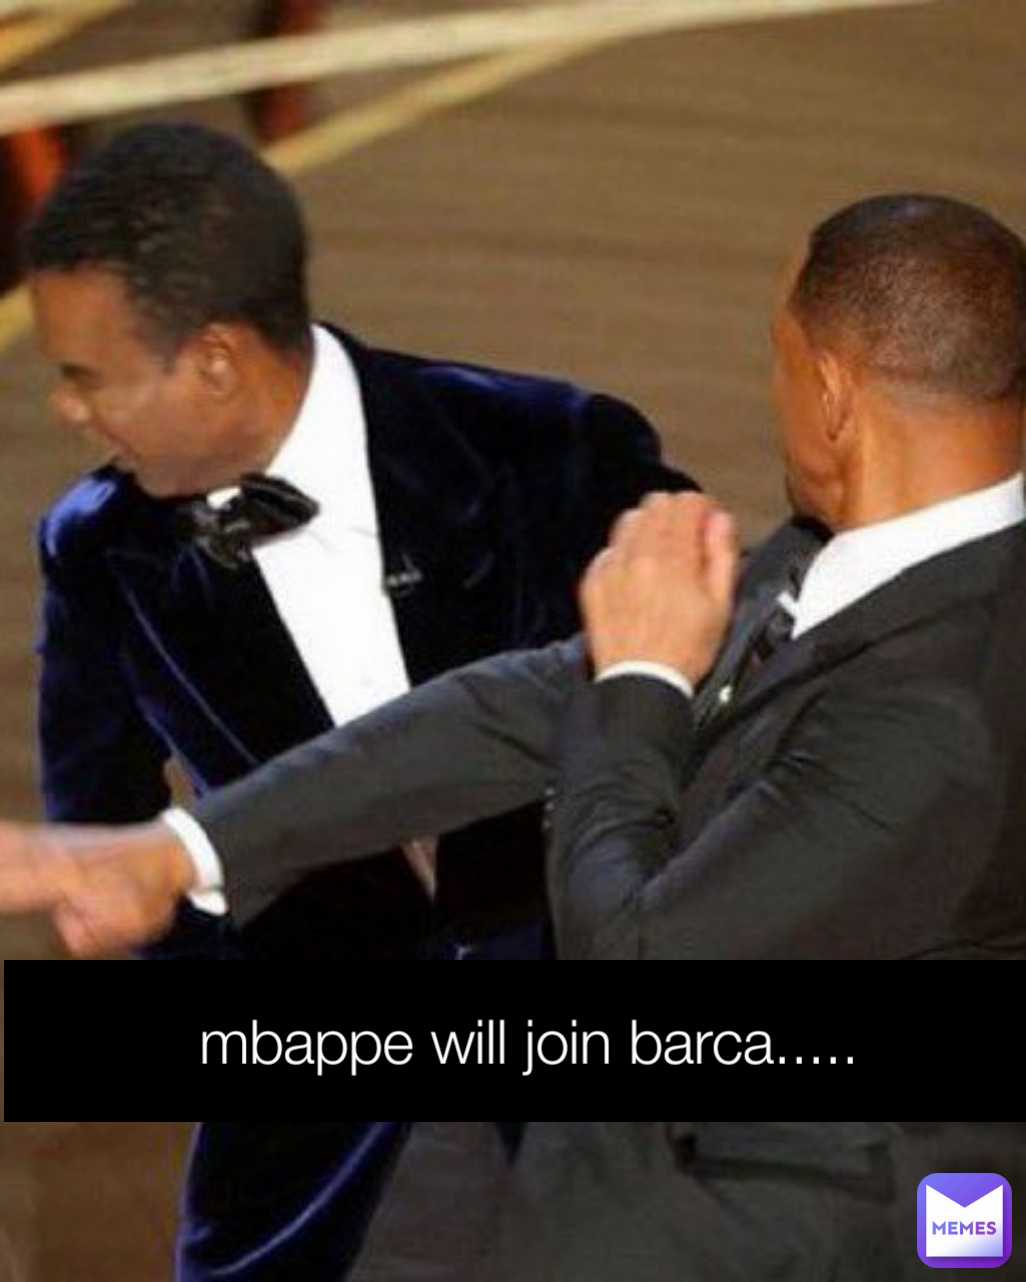 mbappe will join barca.....